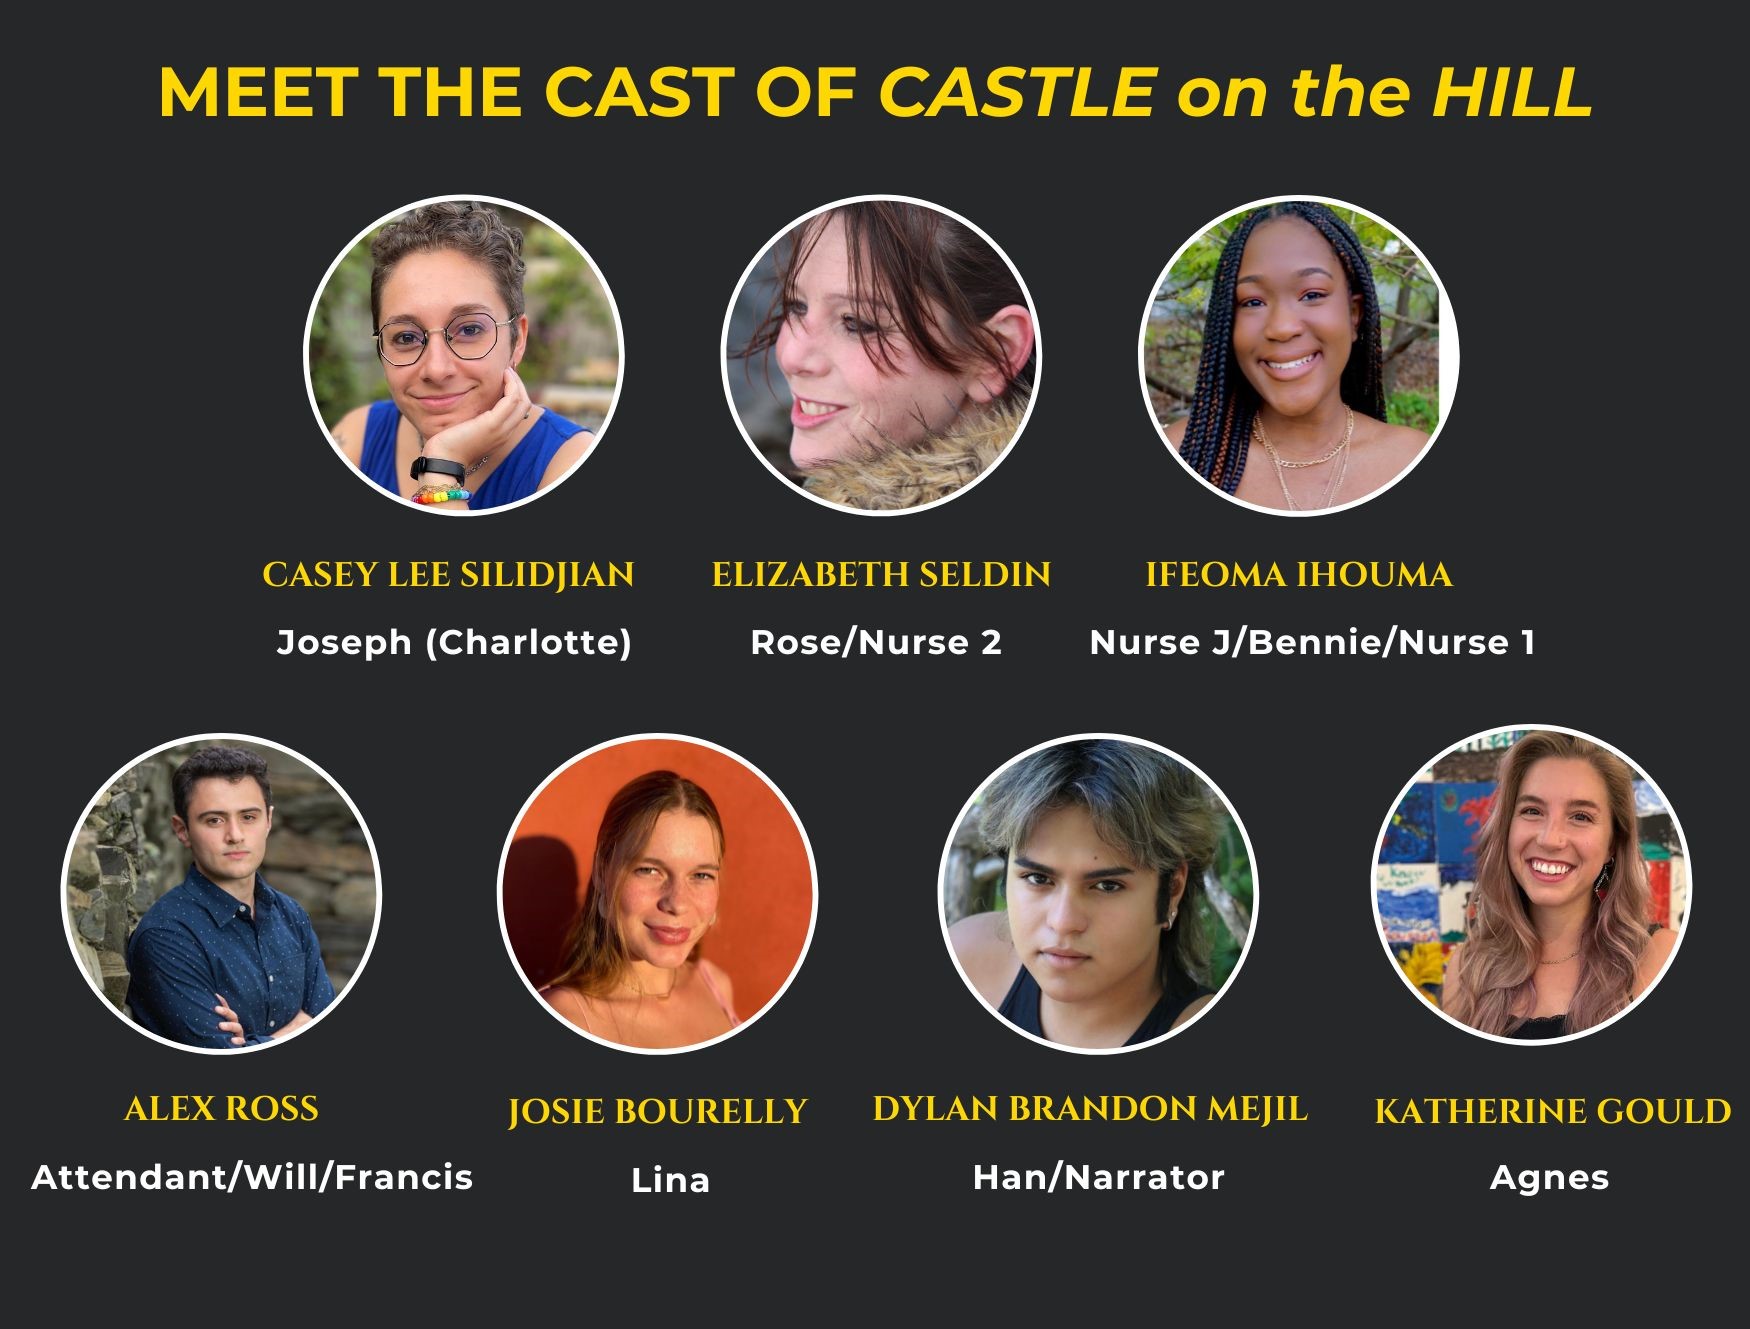 CASTLE on the HILL Cast Members